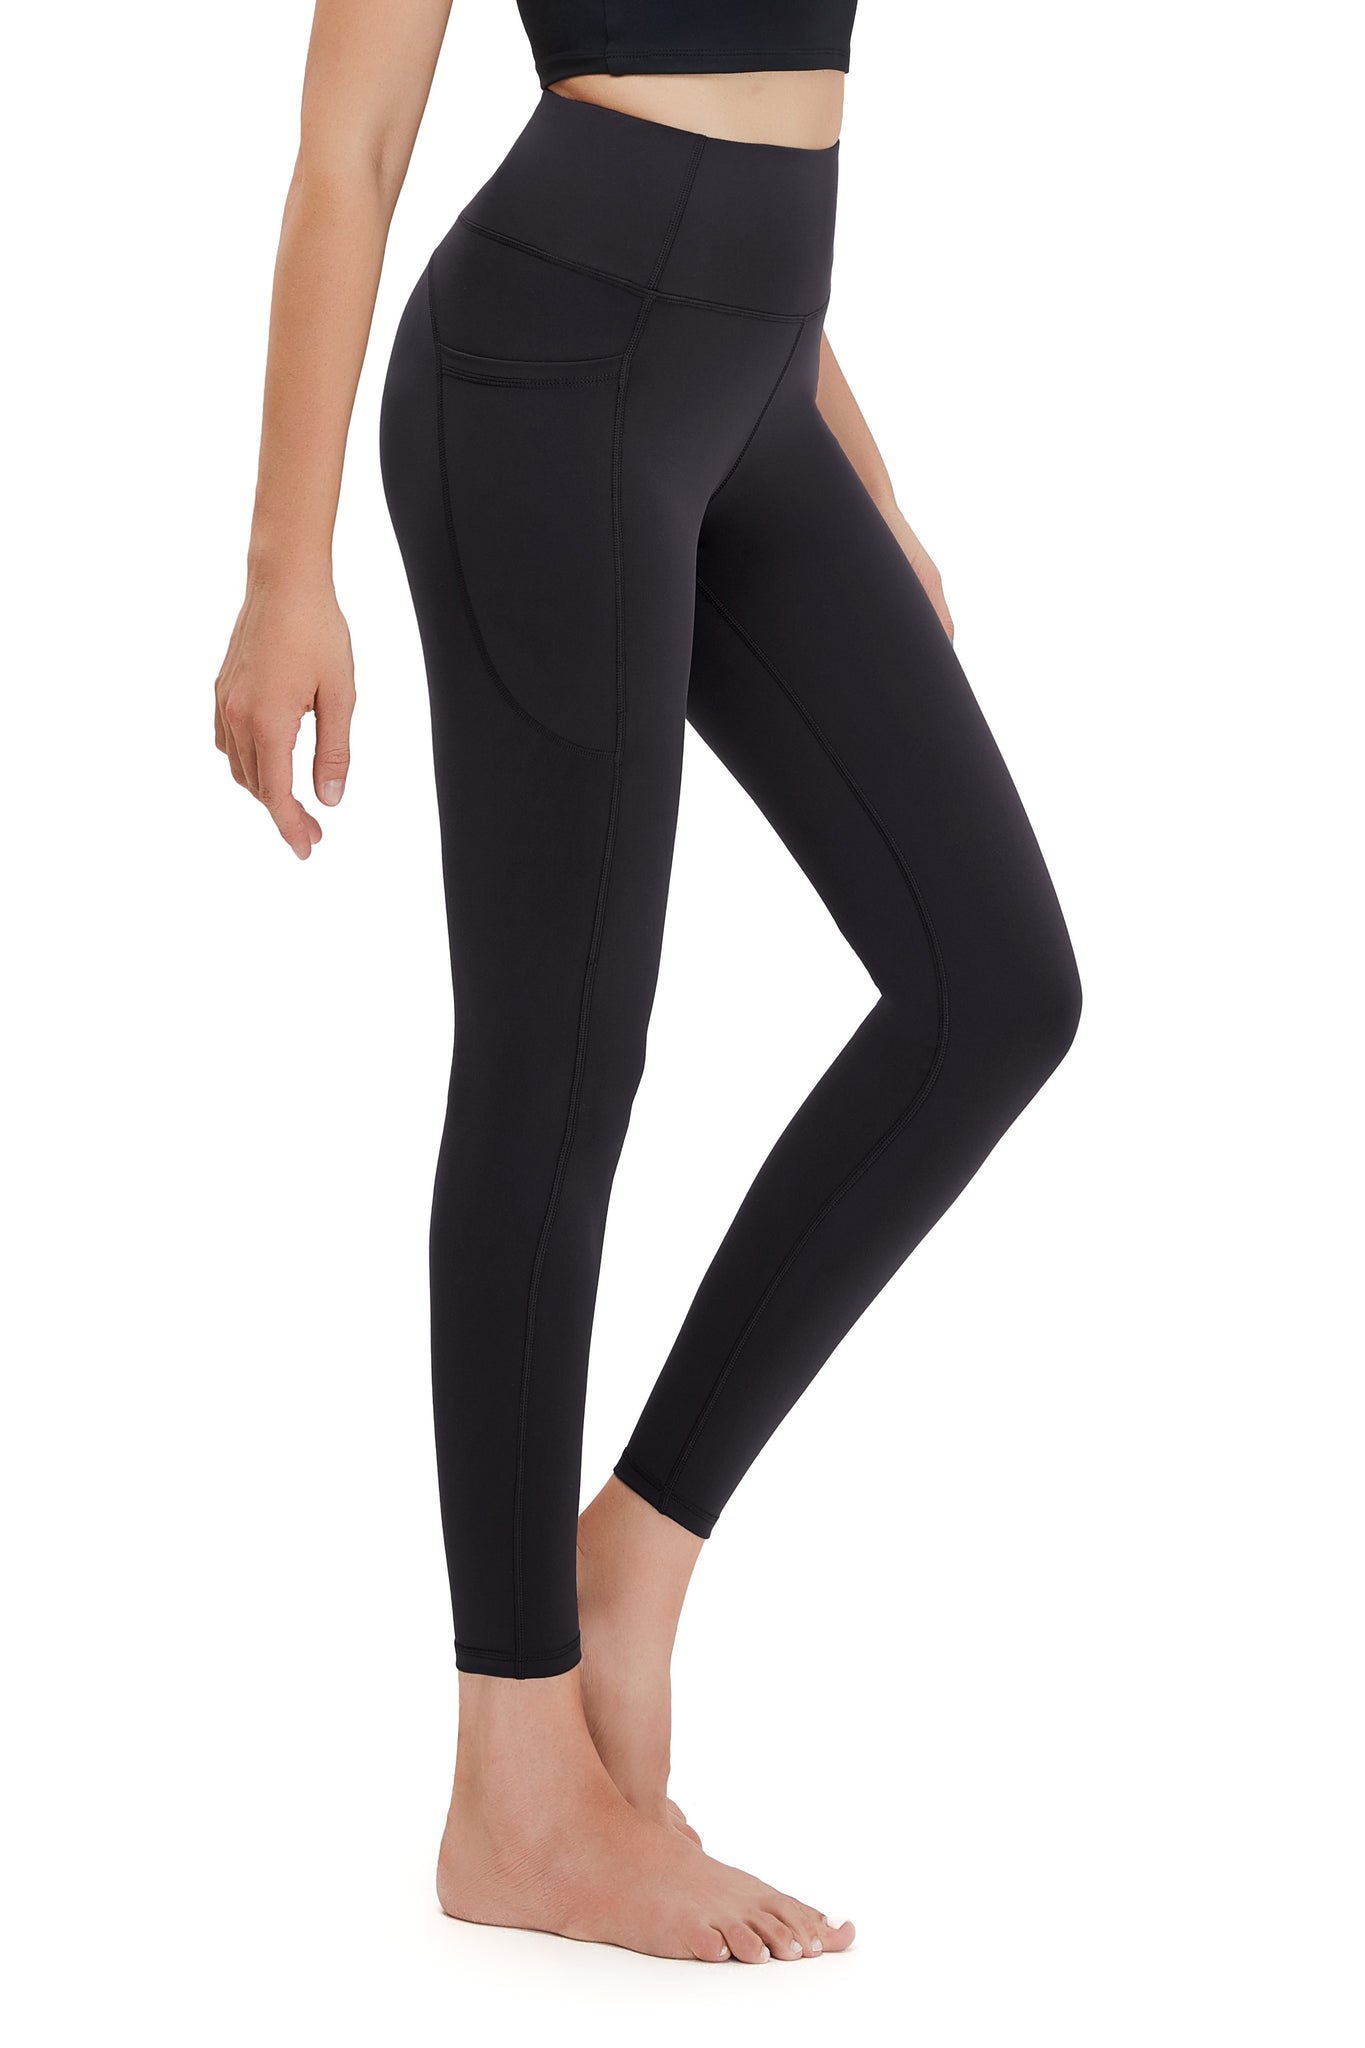 MeloMin Workout Leggings for Women, 25 High Waisted Yoga Pants with S